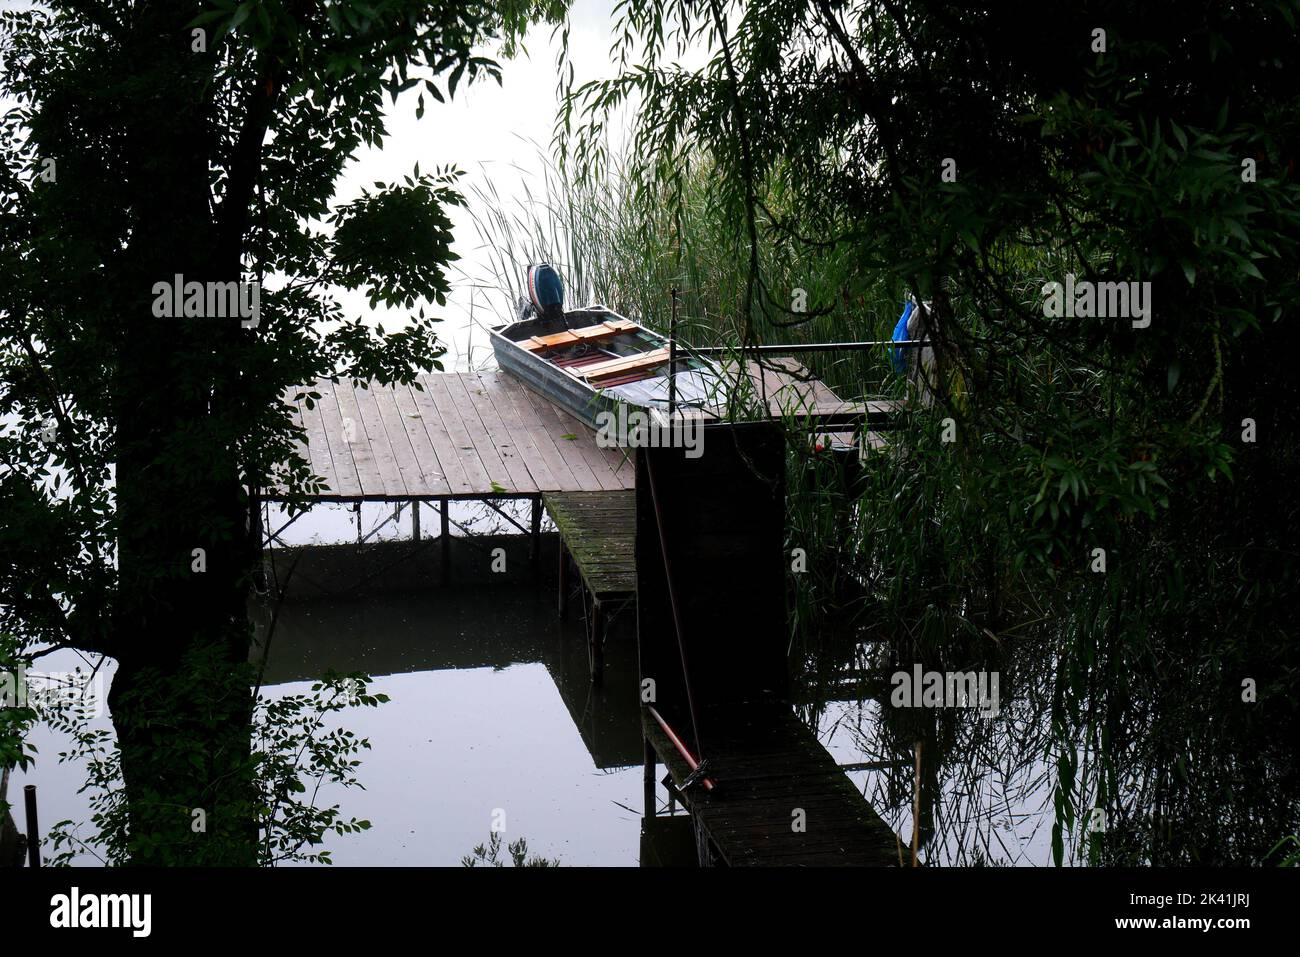 Rowing boat moored at a landing stage on a foggy morning on the River Danube, Szigethalom, Hungary Stock Photo